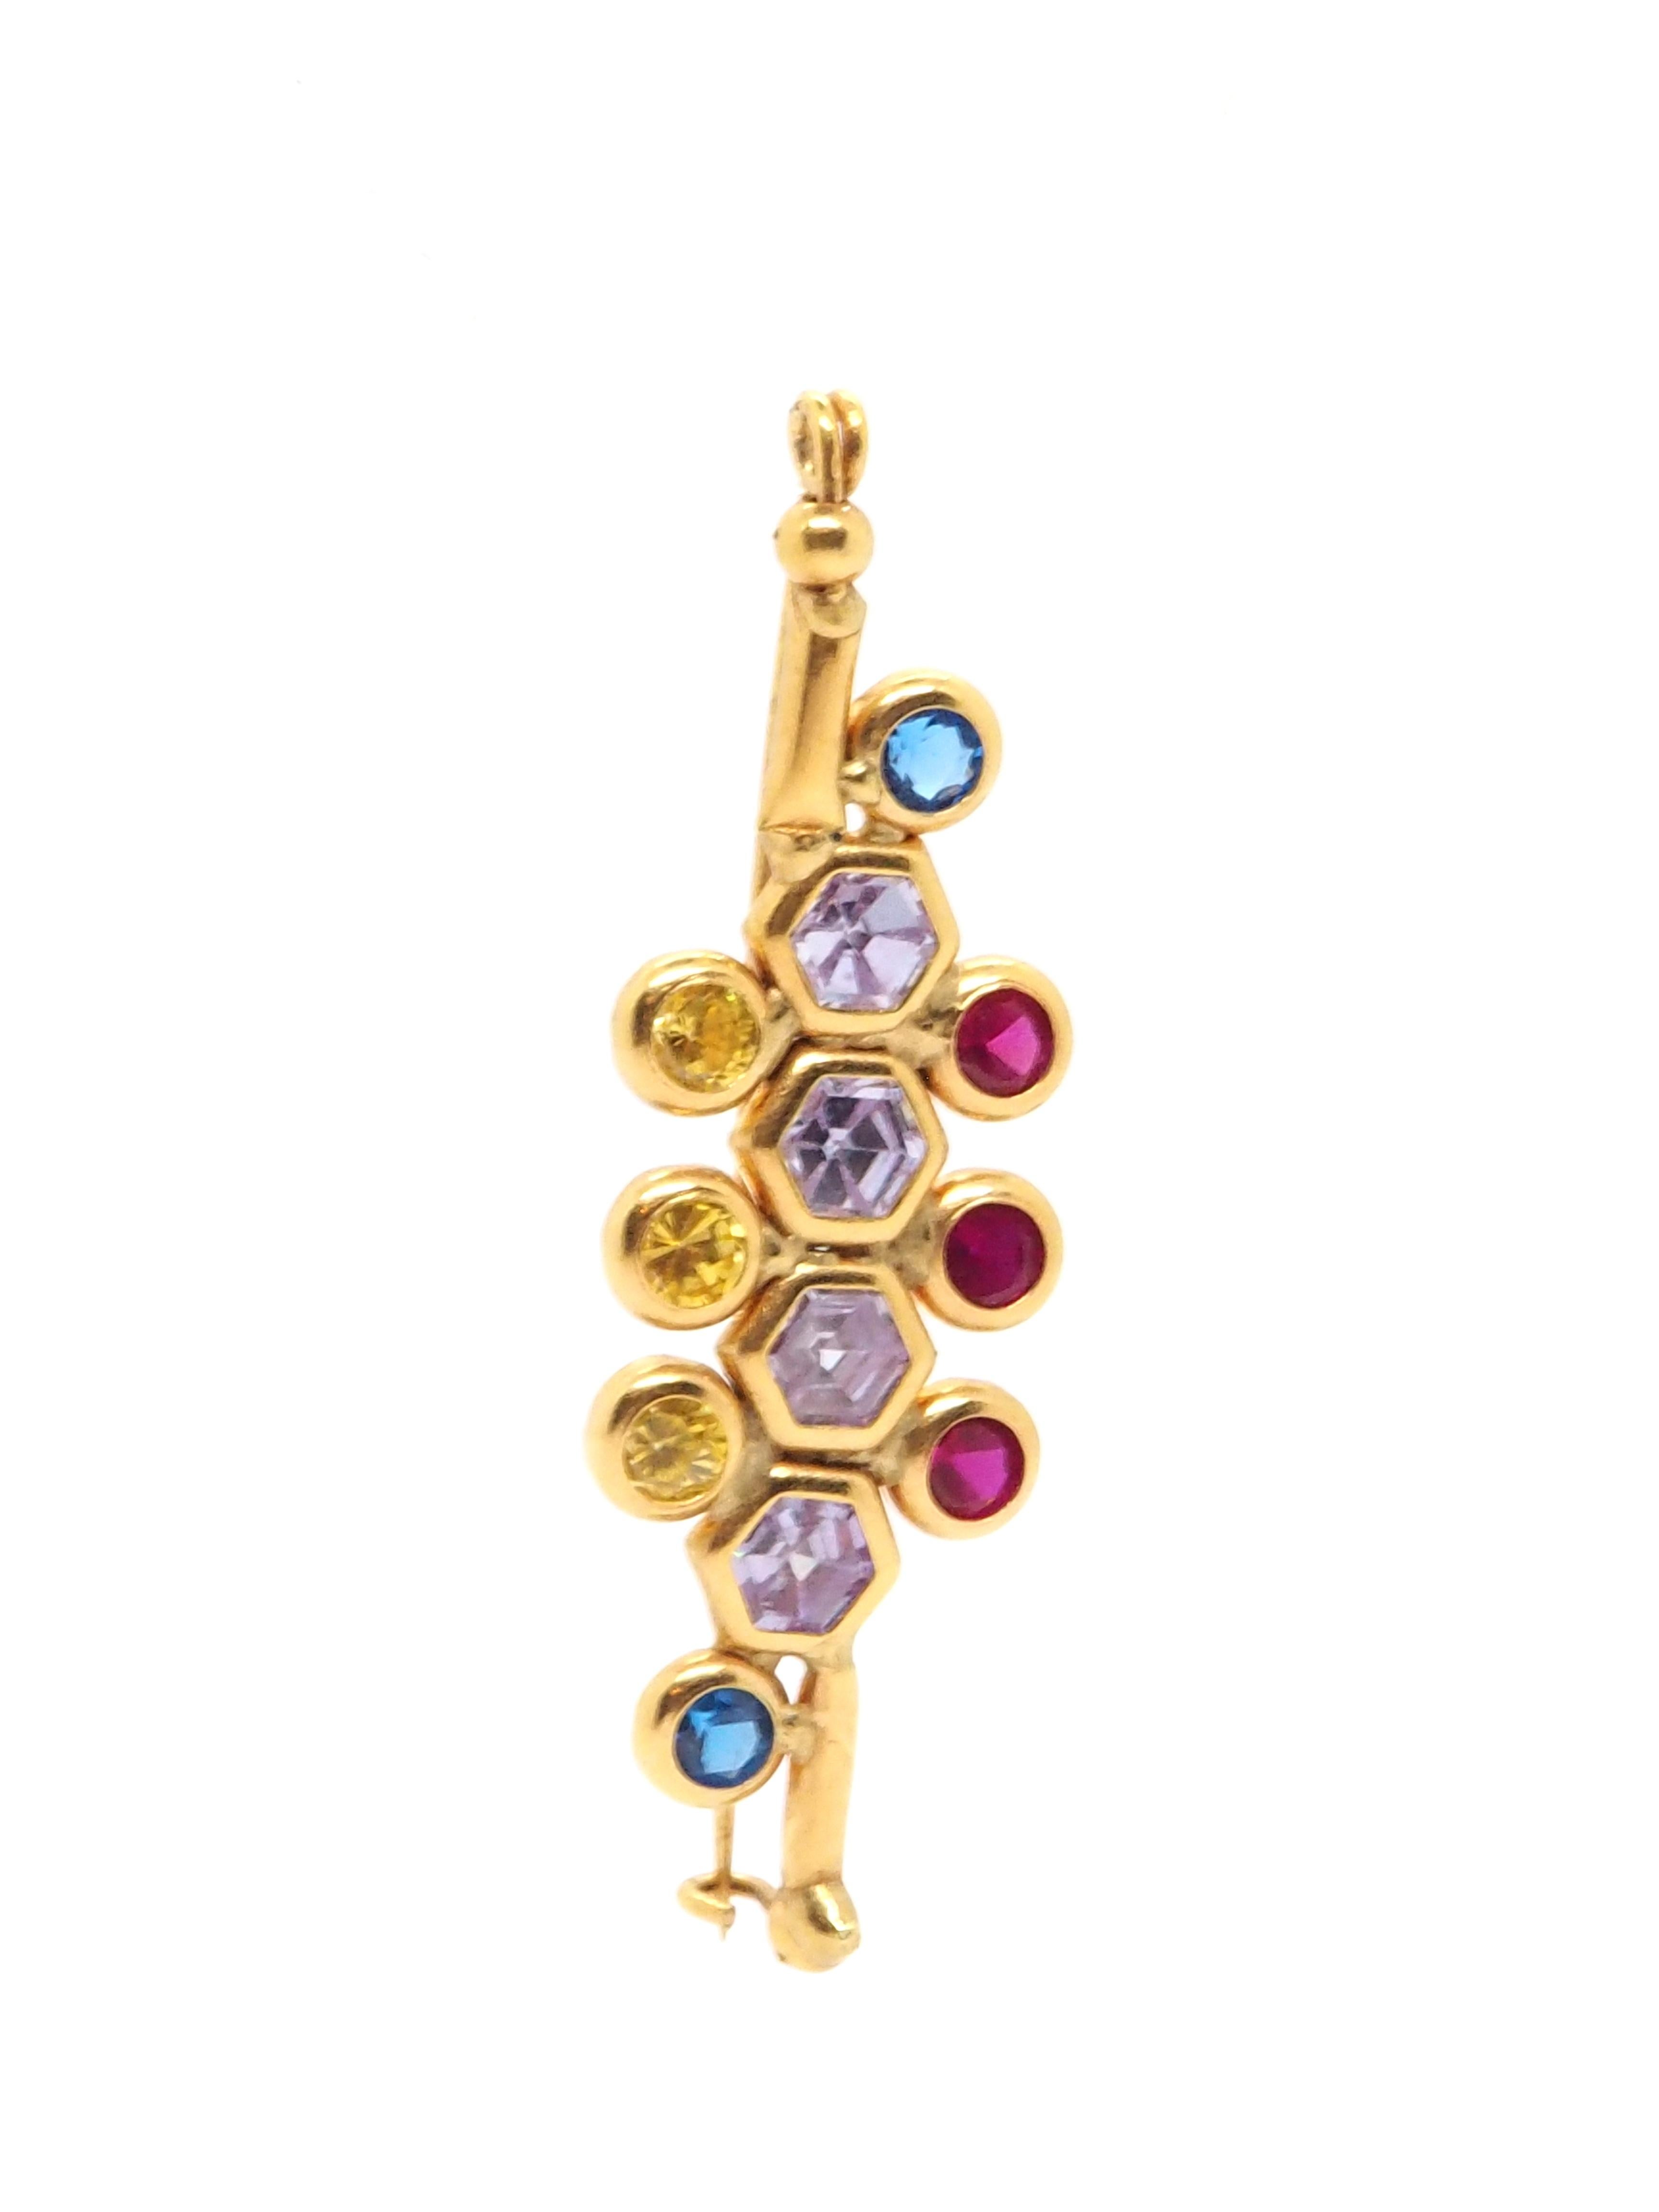 Introducing our exquisite Elegant Brooch, meticulously crafted in 18k yellow gold and adorned with a captivating assortment of precious gemstones. 

Indulge in the allure of this one-of-a-kind piece, designed to elevate your style and make a